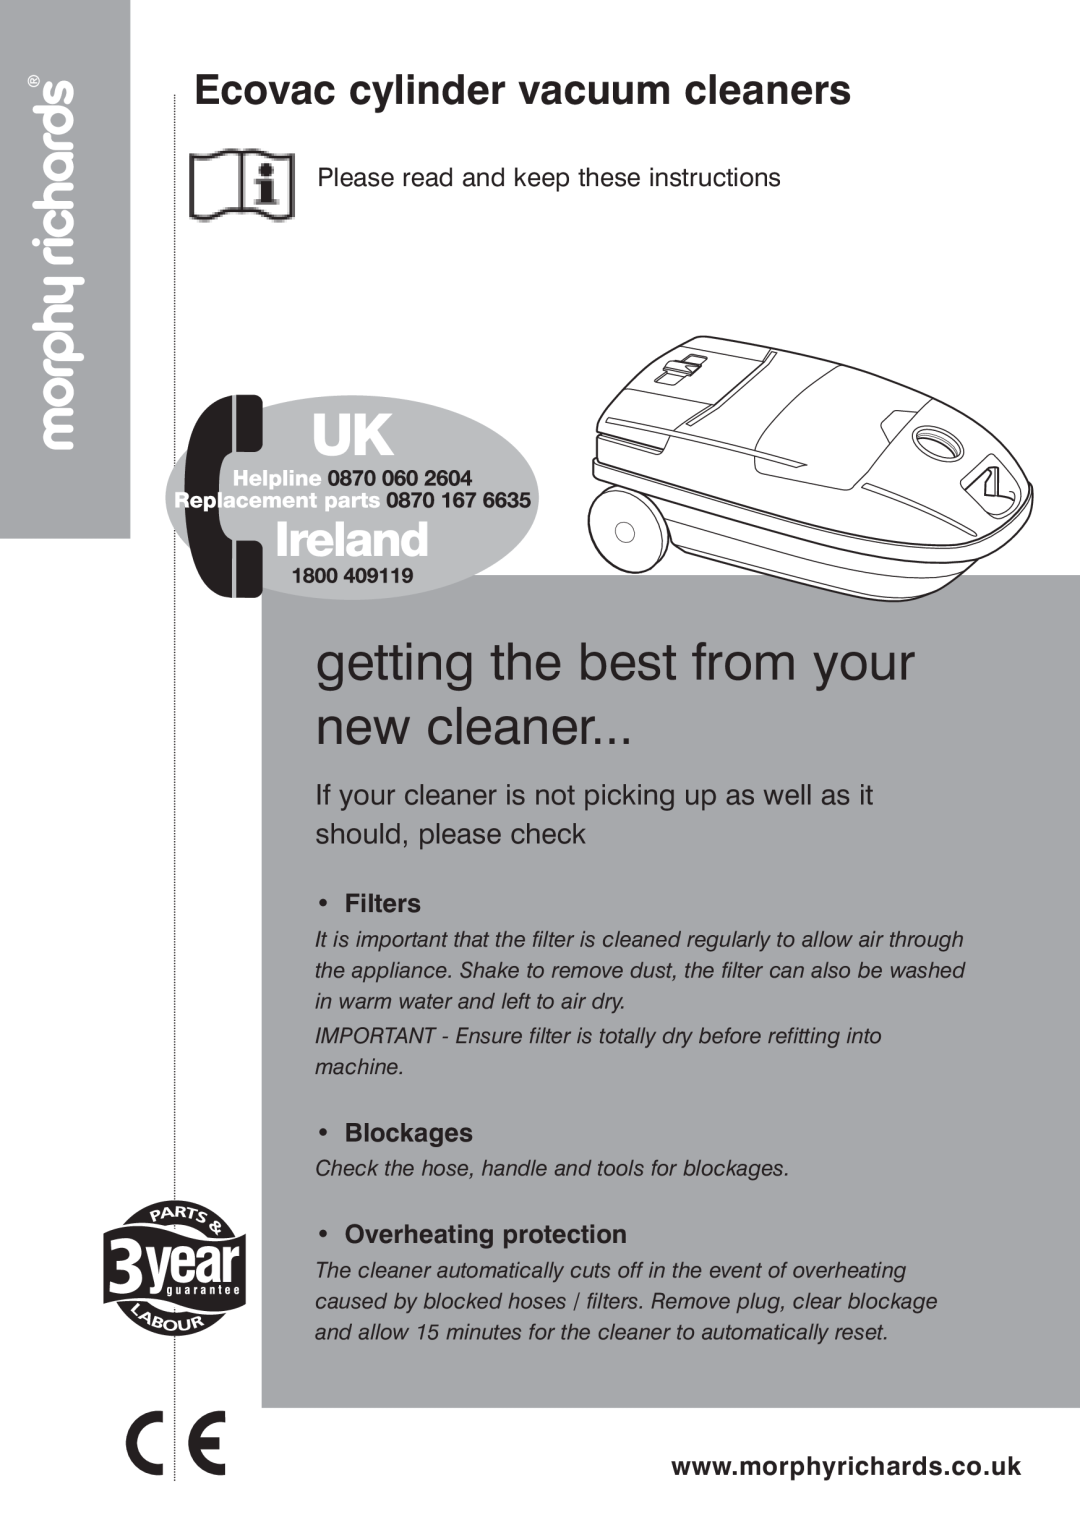 Morphy Richards Ecovac 70096 Rev 2 (Page 1) manual Filters, Blockages, Overheating protection 